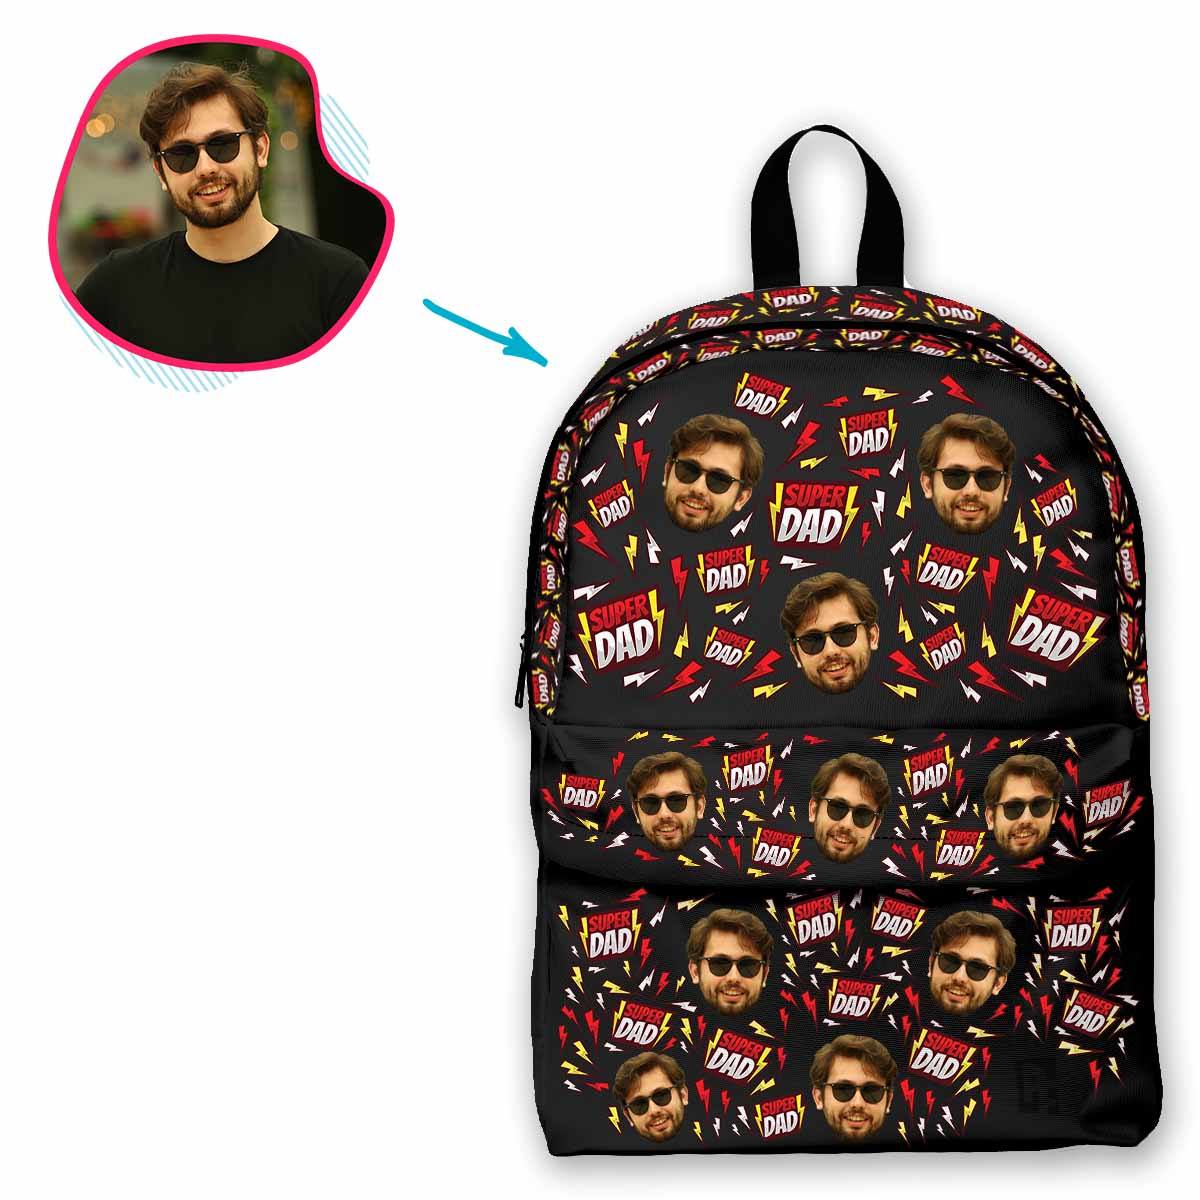 dark Super Dad classic backpack personalized with photo of face printed on it